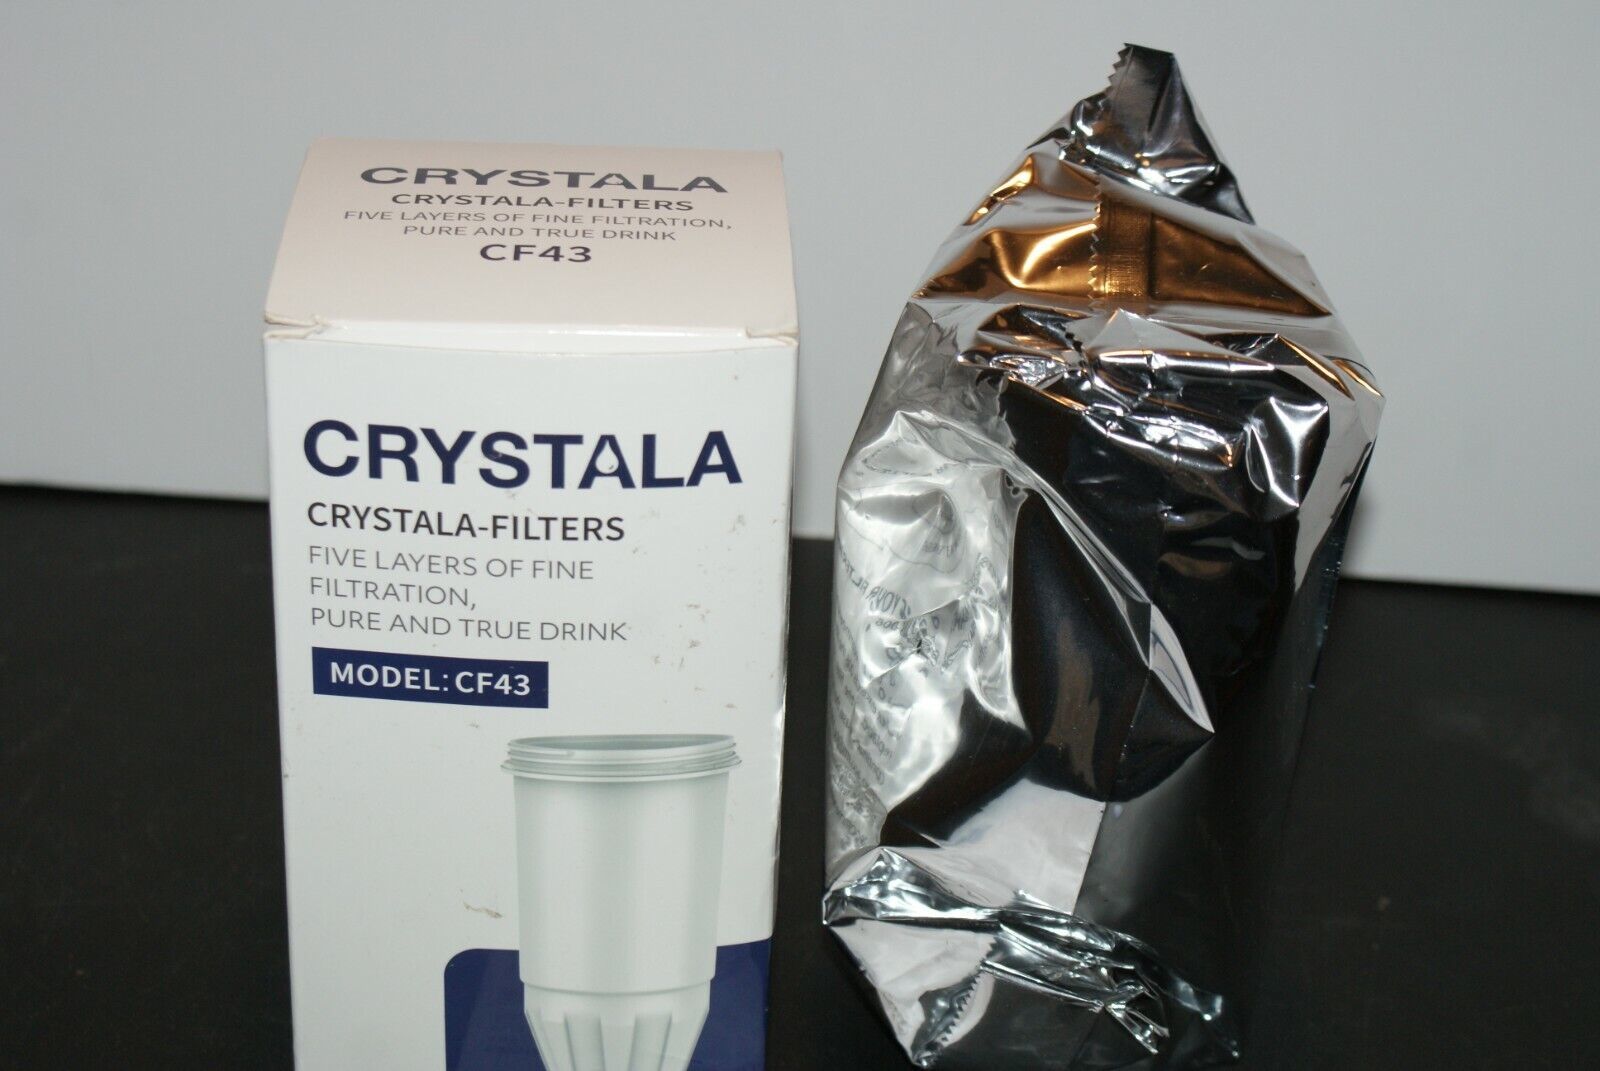 Primary image for Crystala-Filters Five Layers of Fine Filtration, Pure & True Drink Model CF43